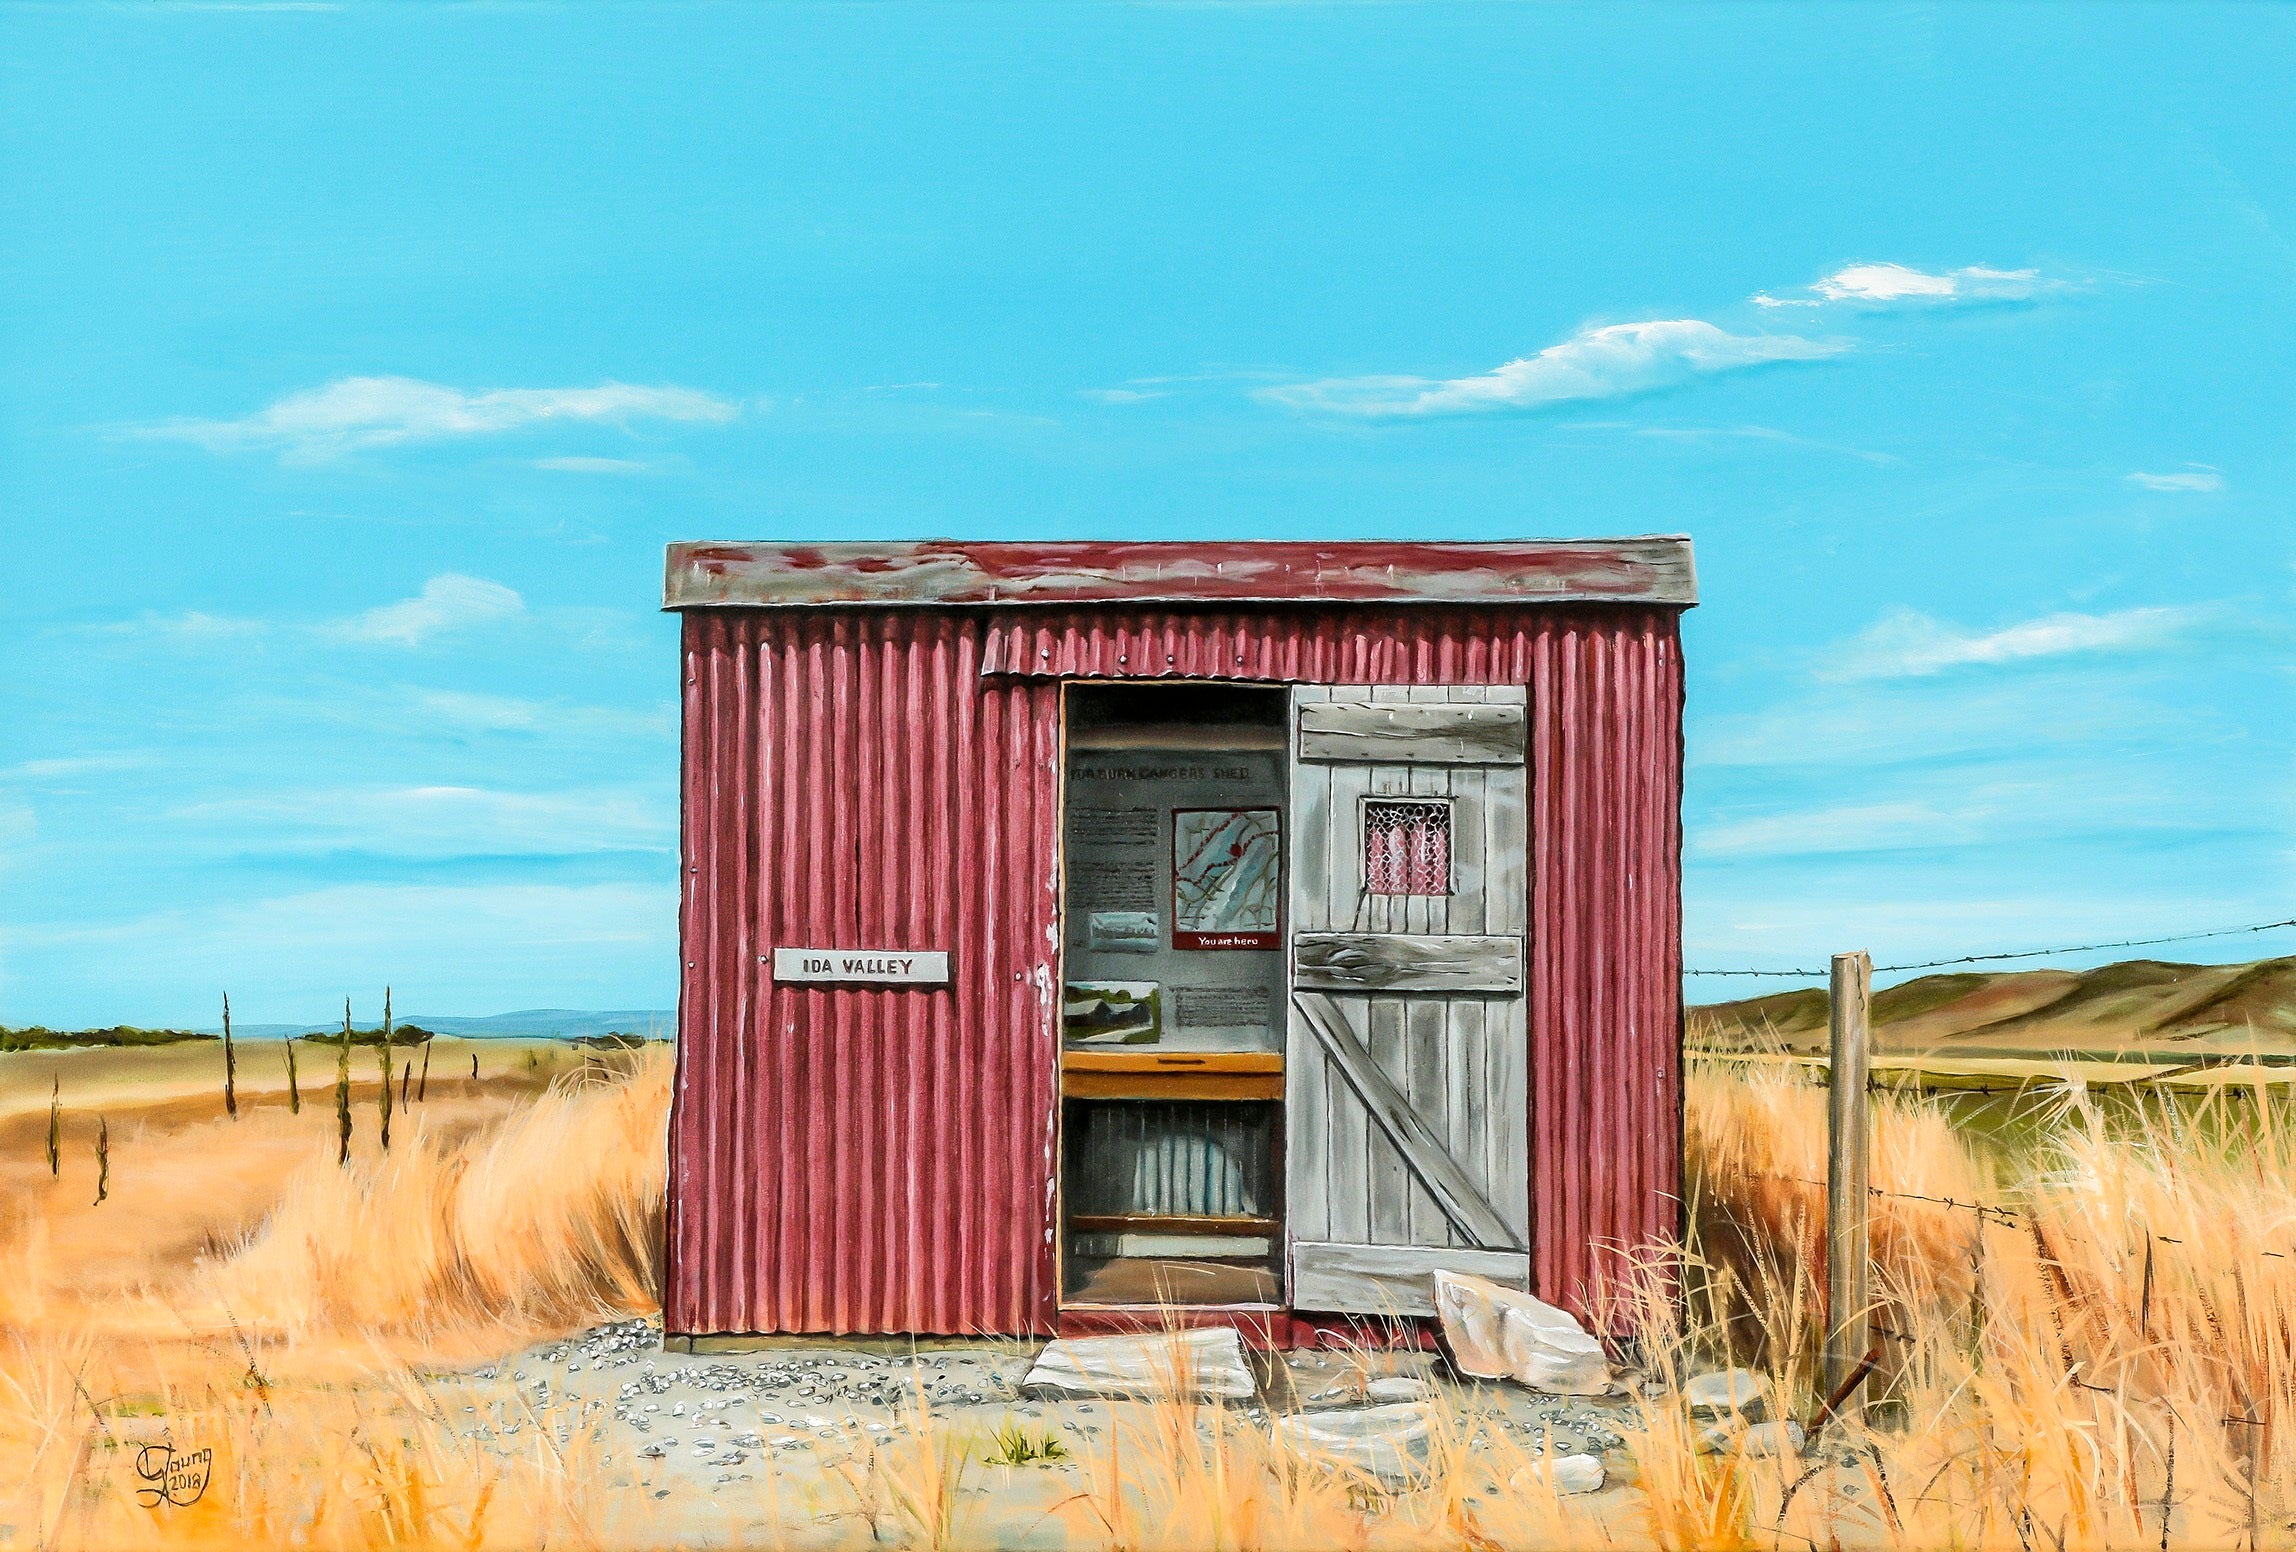 Ida Valley Gangers Shed Prints - grahamyoungartist.com - Original Artwork and Prints by New Zealand Artist Graham Young